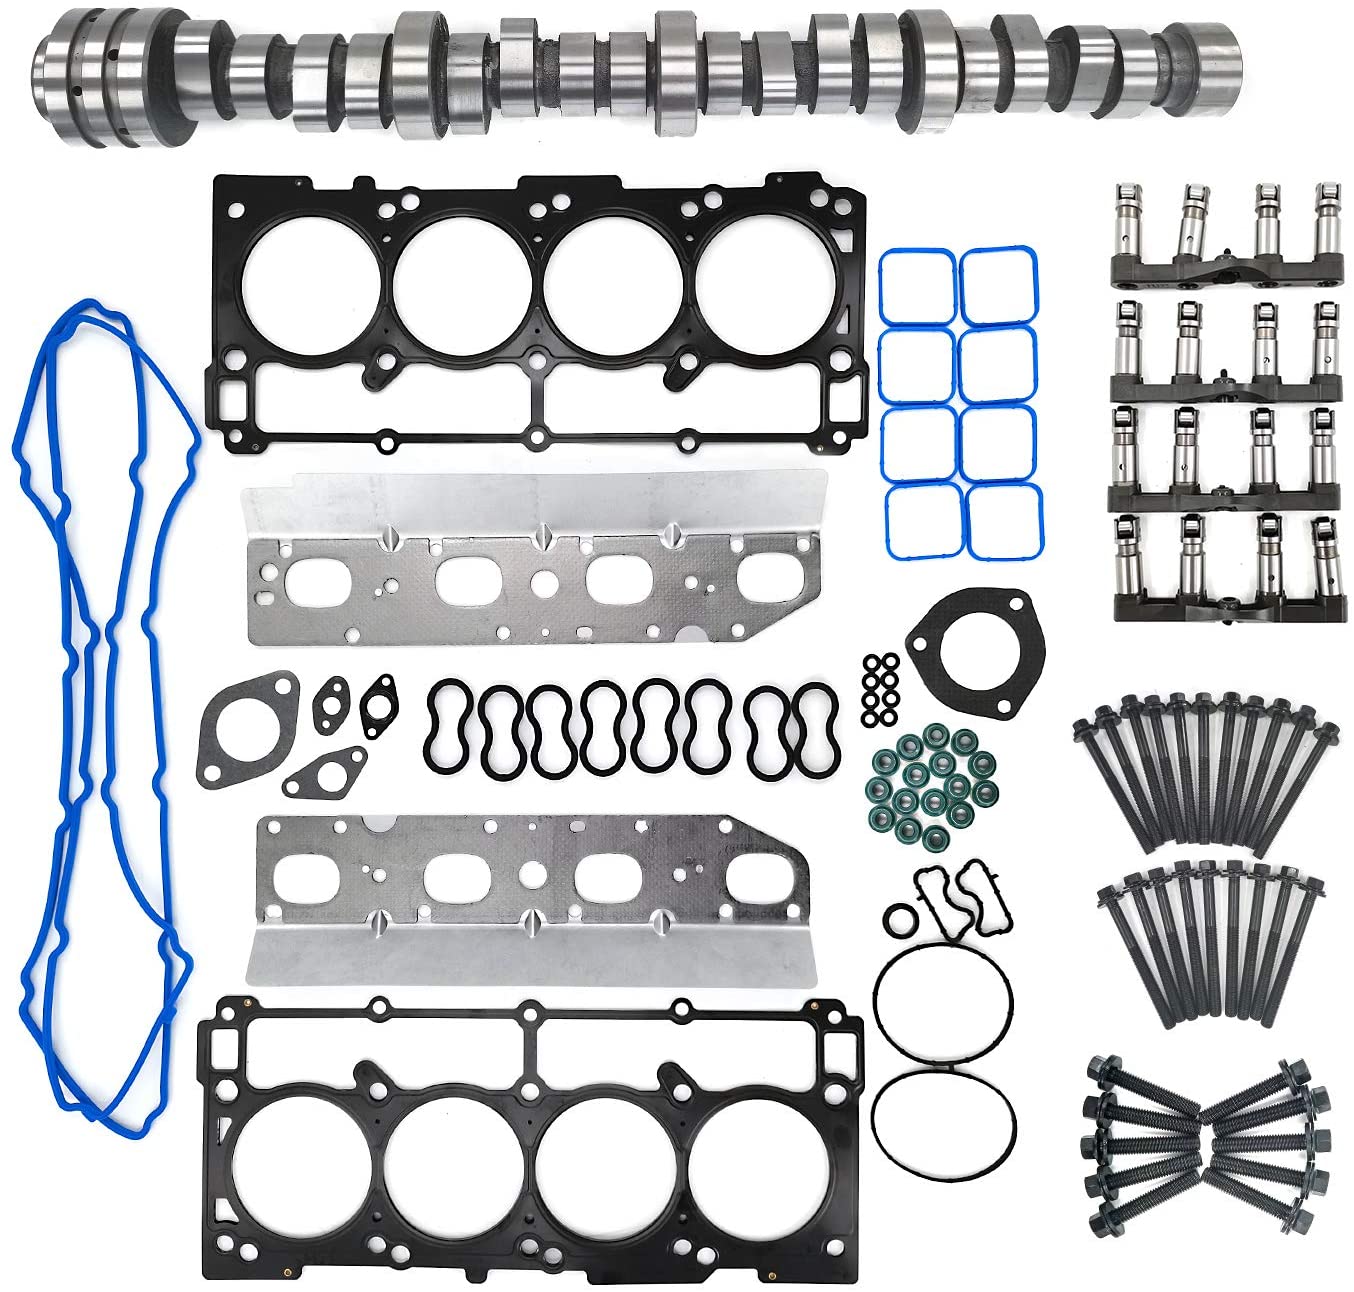 Dimaier MDS 53021726AE Camshaft Lifters Head Gaskets Kit Replacement for Dodge Ram 1500 5.7L 2009-2016 53021726AD 